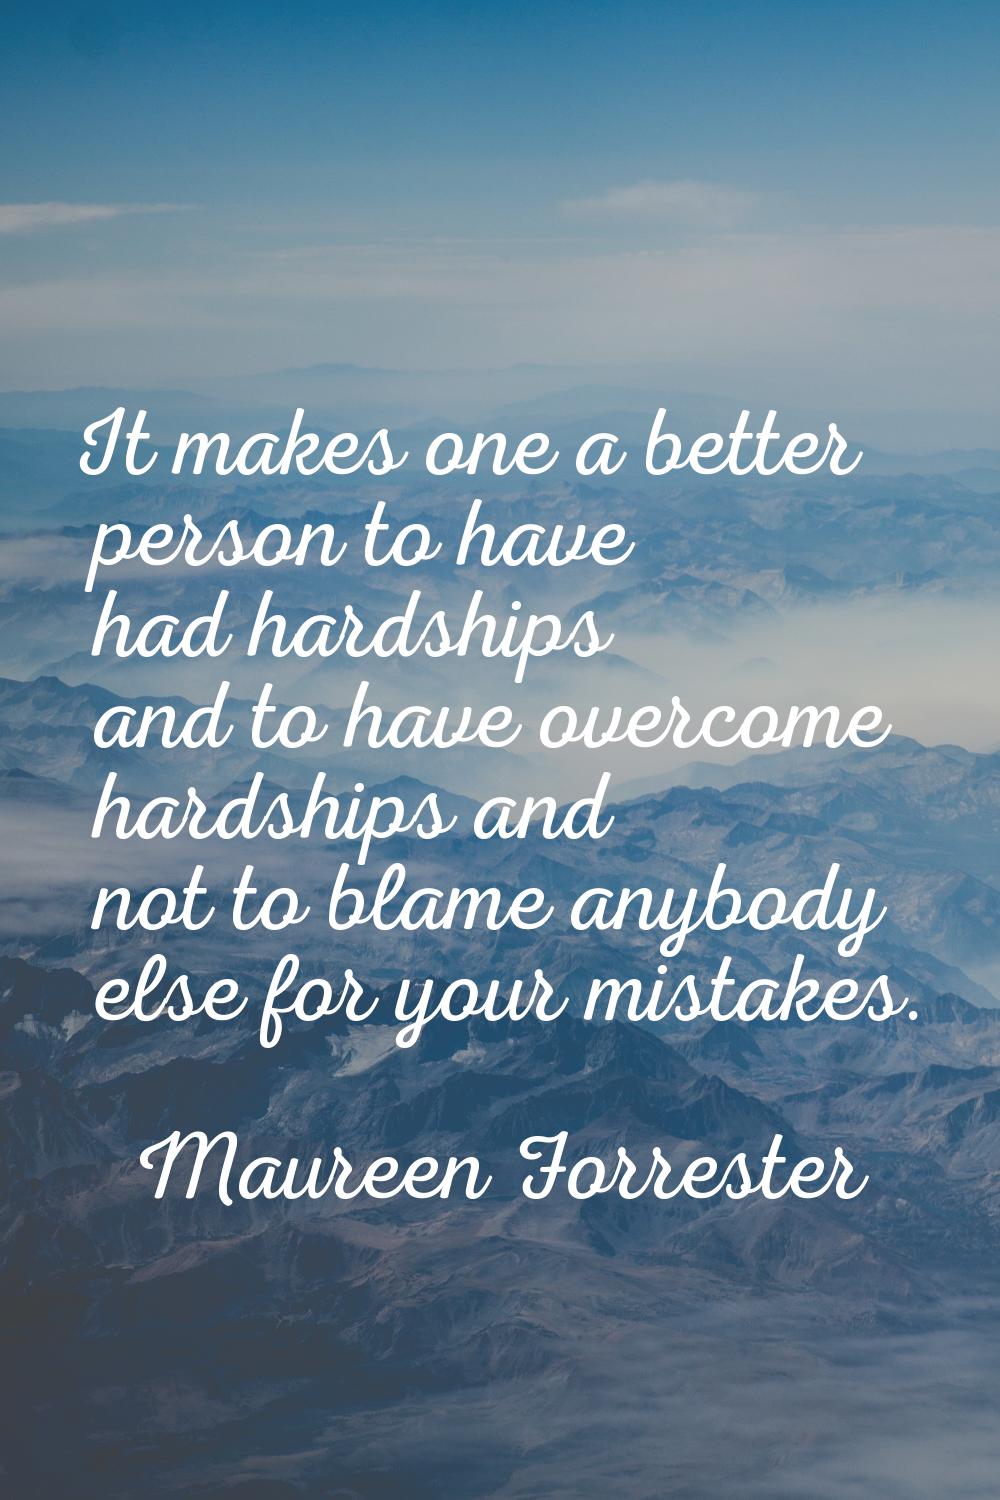 It makes one a better person to have had hardships and to have overcome hardships and not to blame 